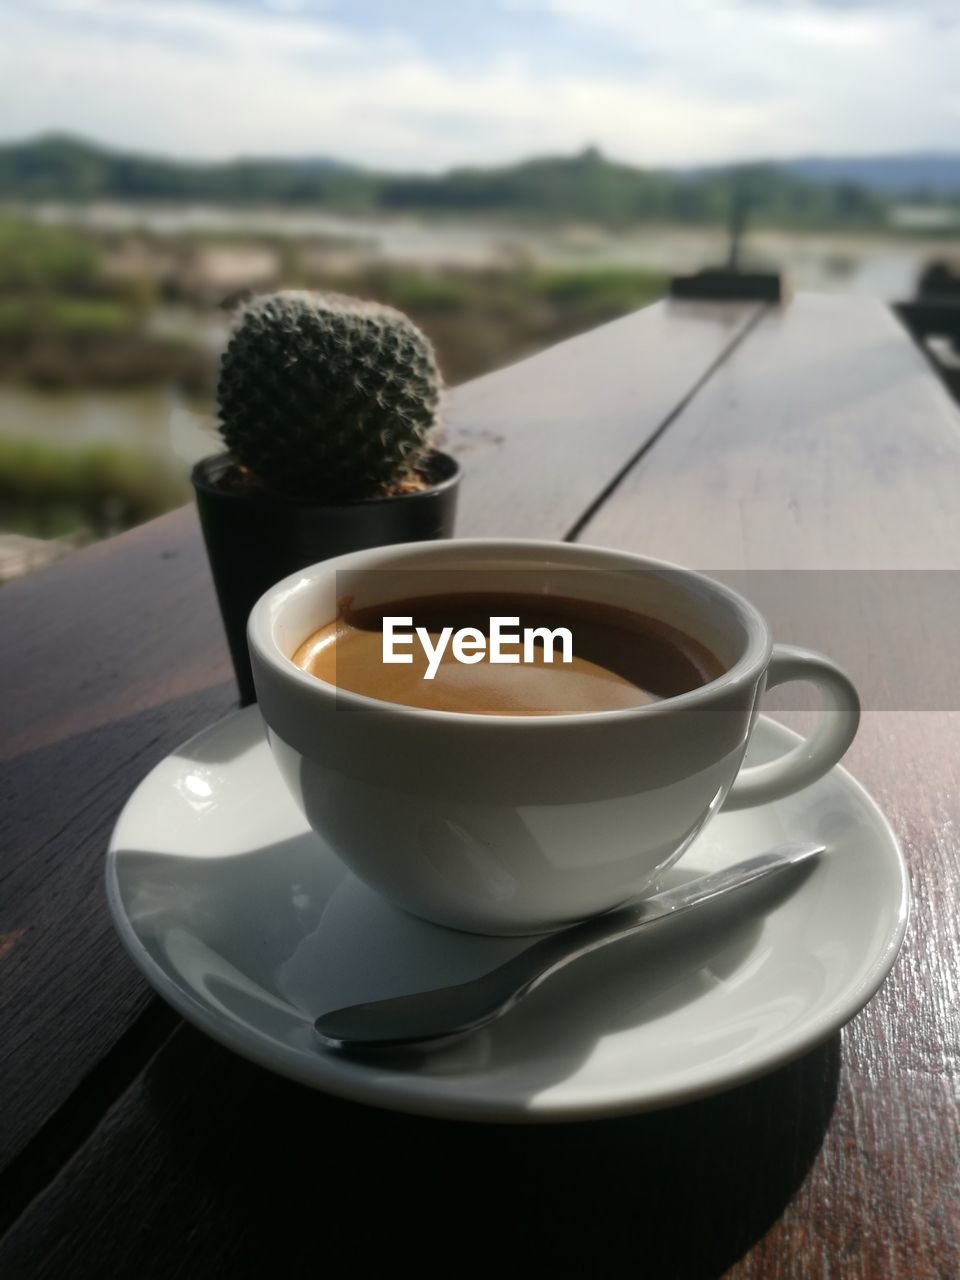 CLOSE-UP OF COFFEE CUP ON TABLE AGAINST BLURRED BACKGROUND